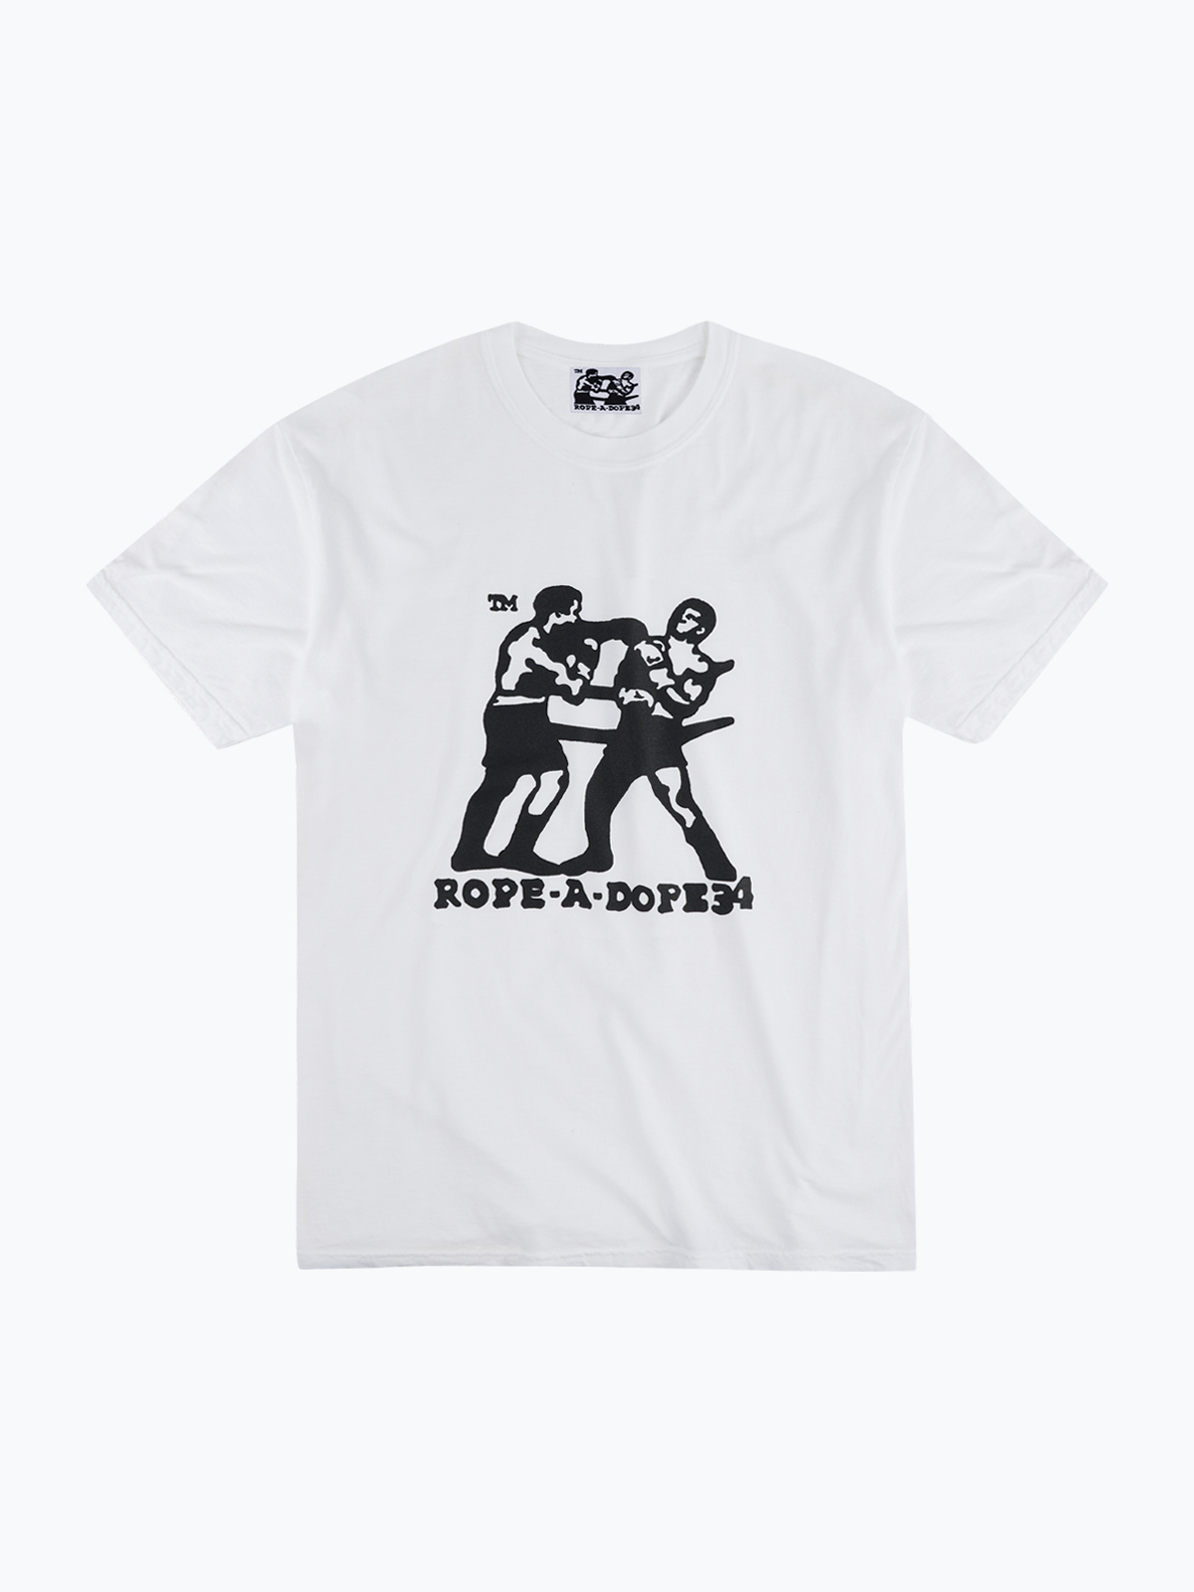 [ROPE A DOPE 34] ROPE A DOPE LOGO TEE (WHTIE)